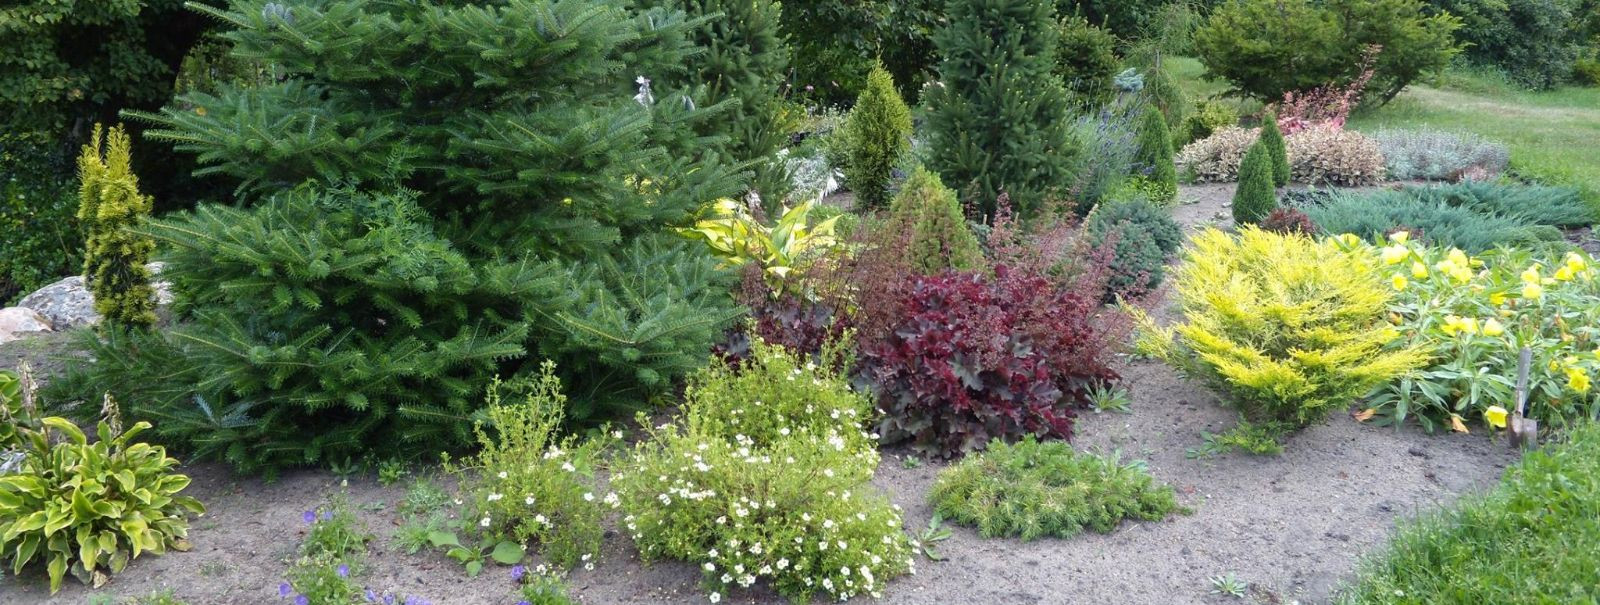 Sustainable landscaping is an approach to designing, creating, and maintaining outdoor spaces in a way that ensures the health and longevity of the environment.